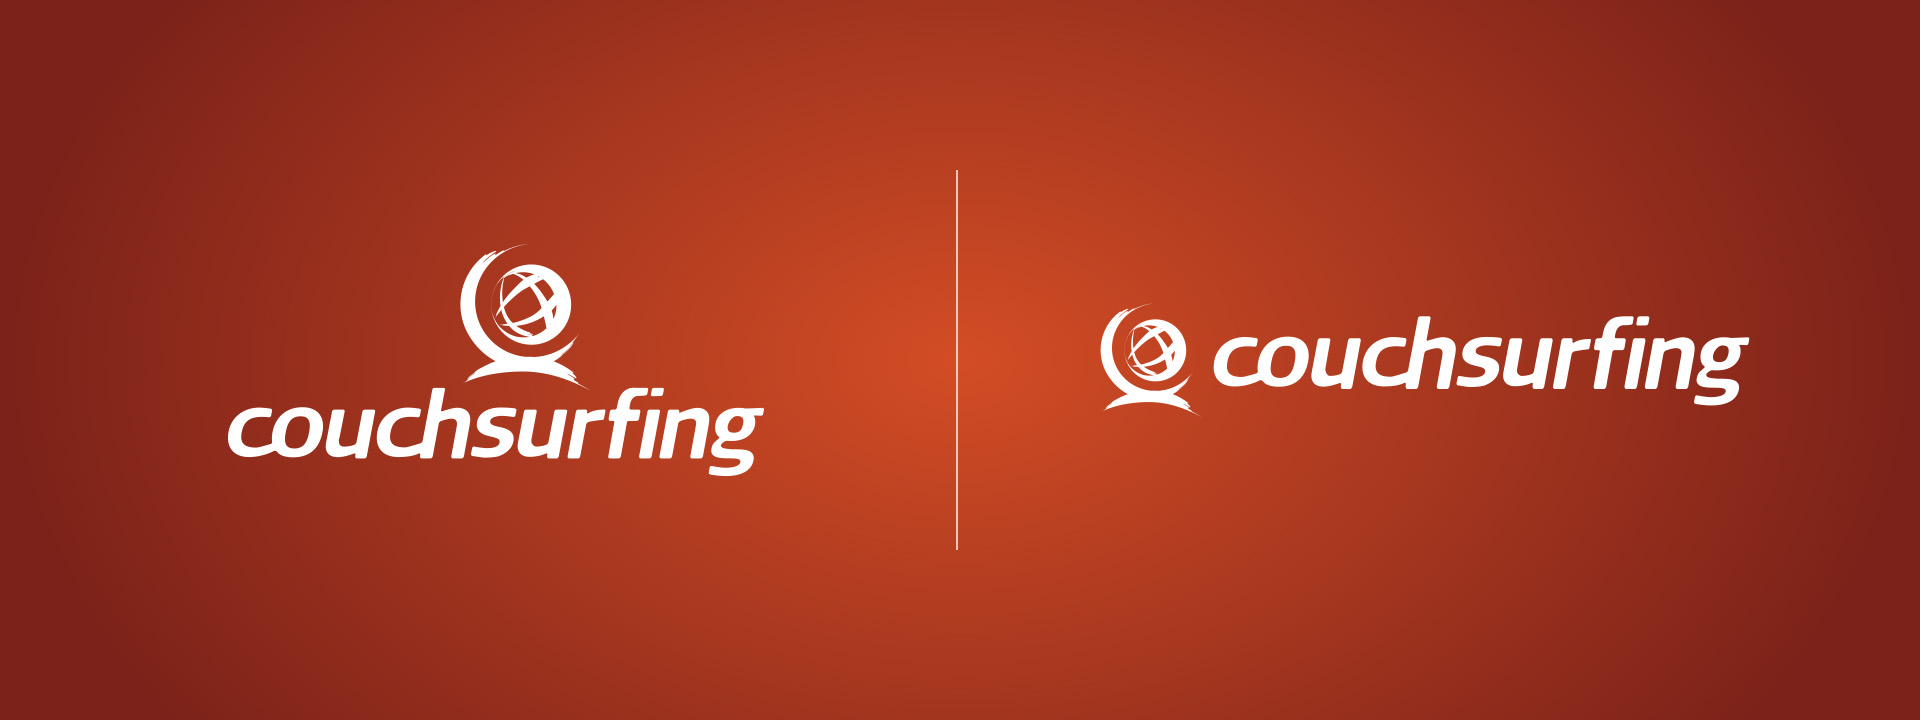 05-couchsurfing_logo_configurations